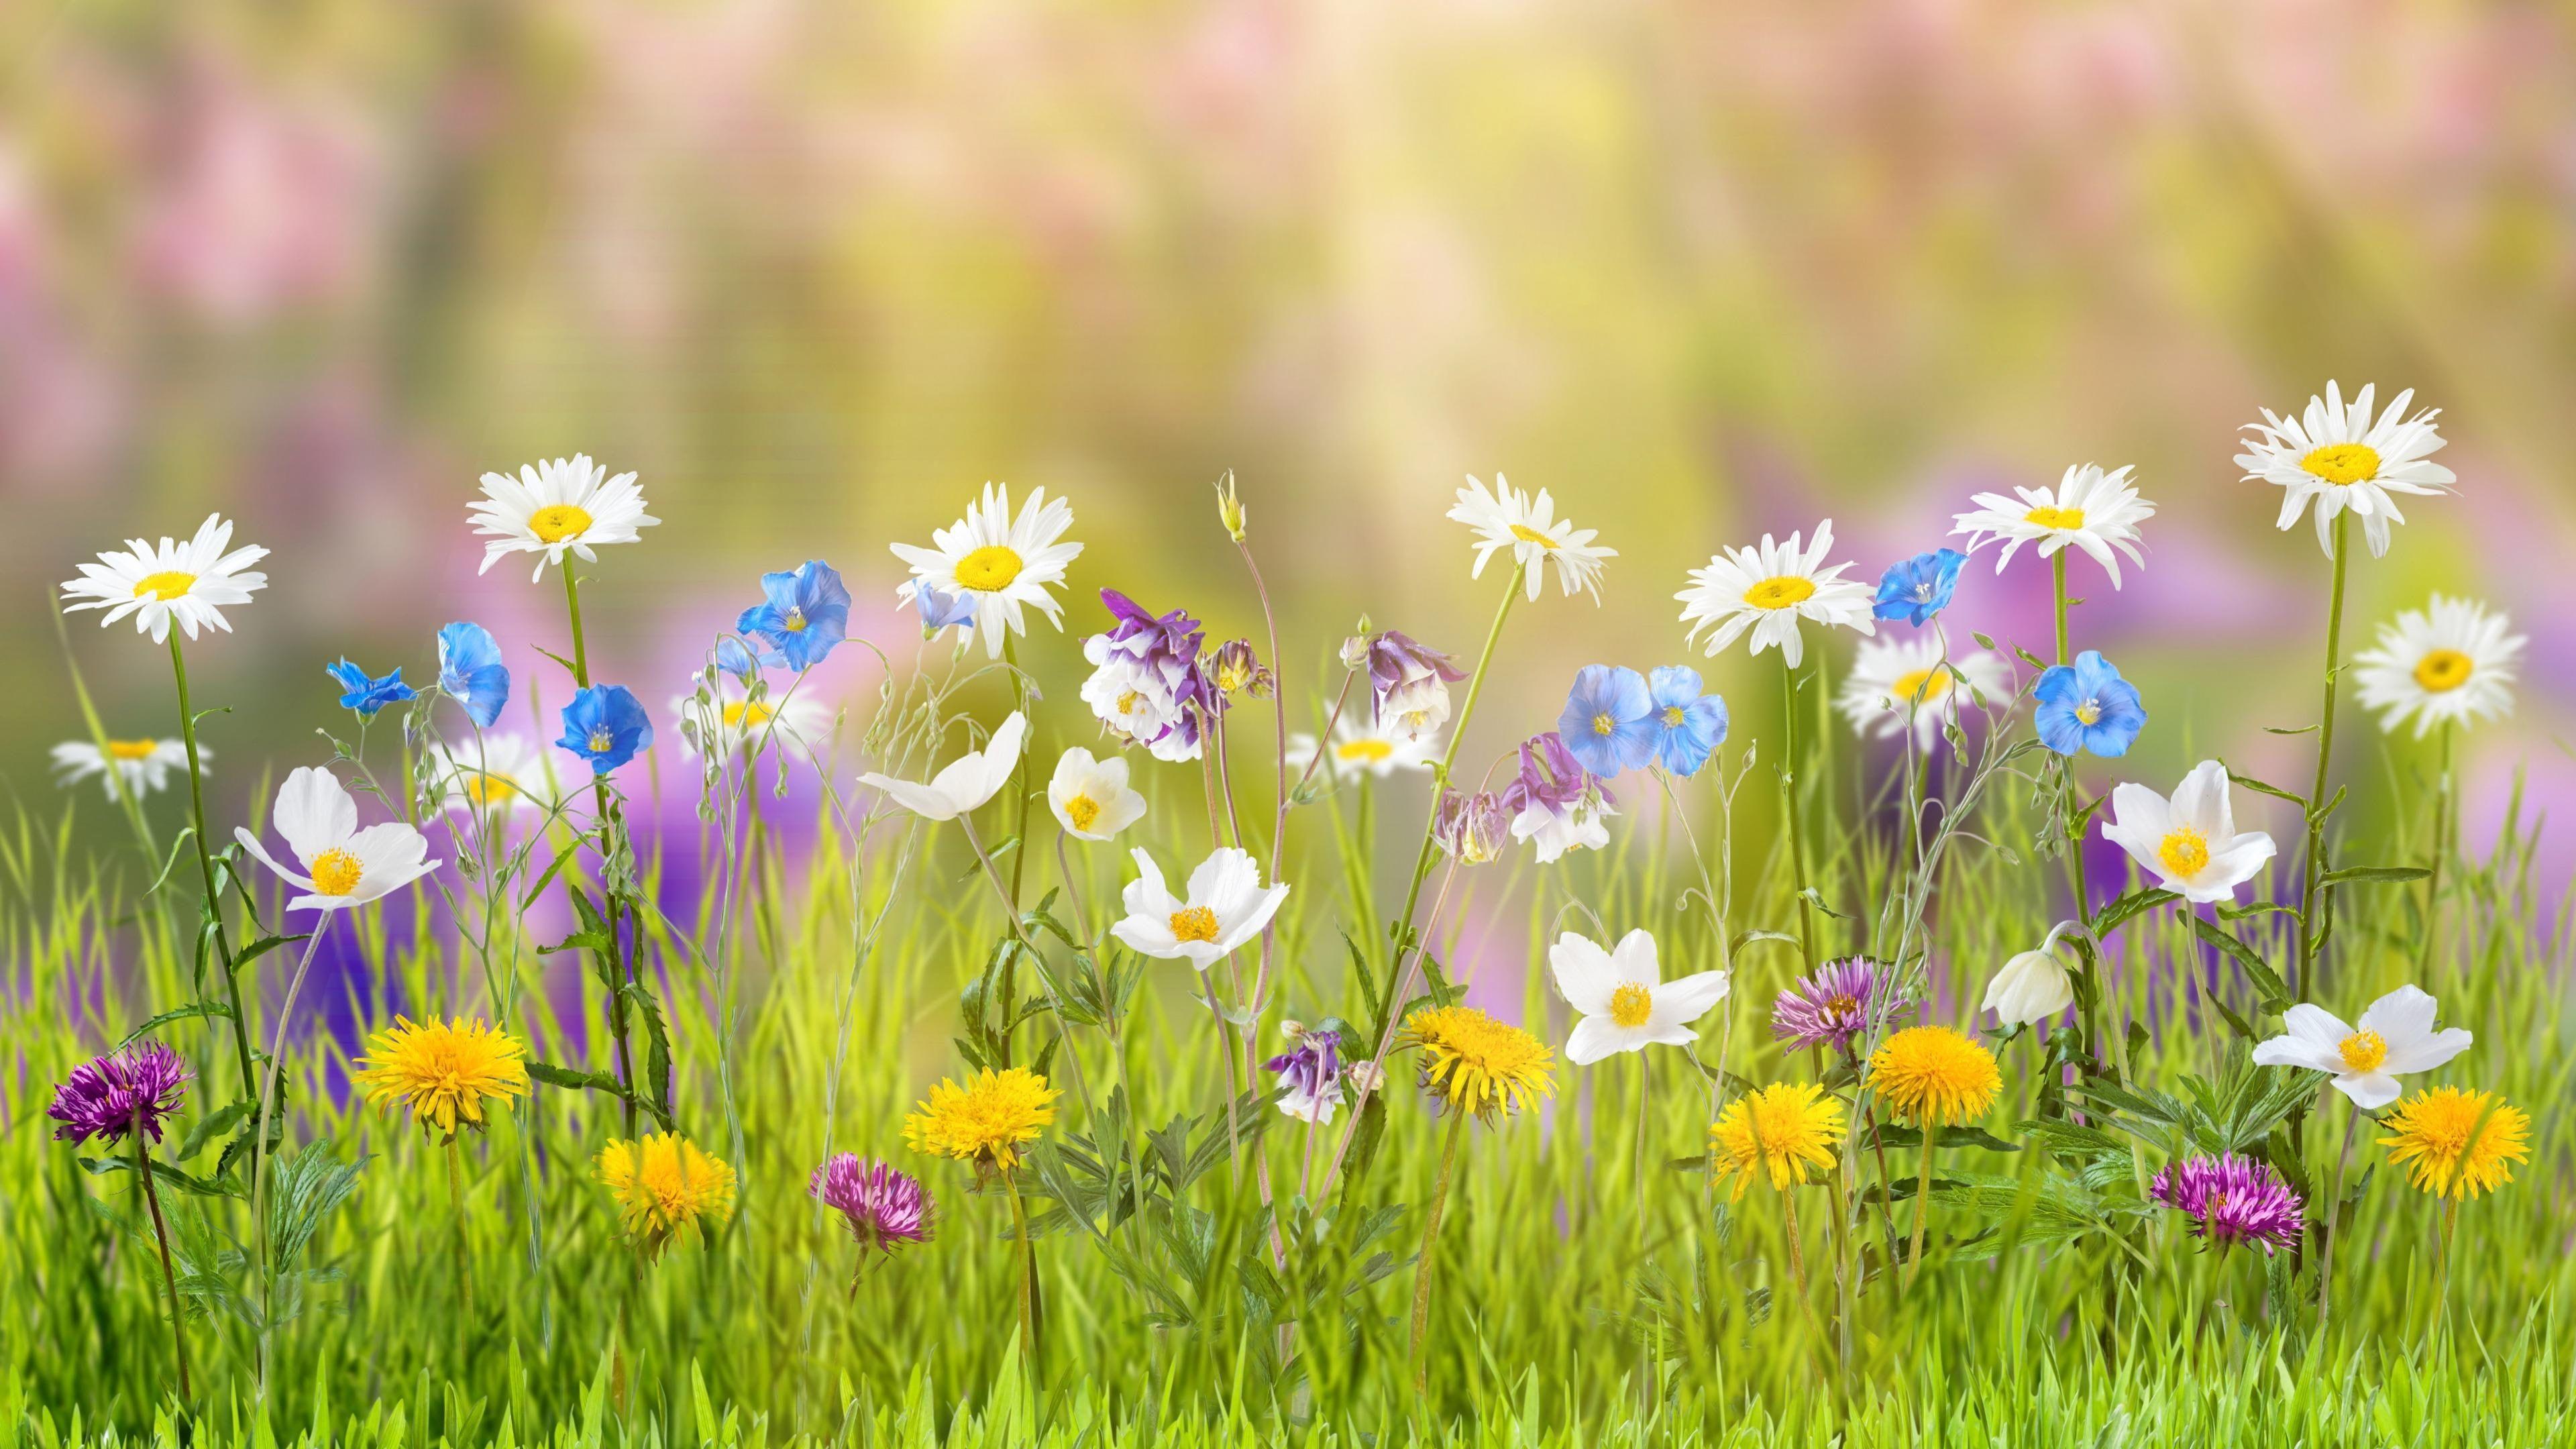 Grass And Flowers Wallpapers Top Free Grass And Flowers Backgrounds Wallpaperaccess